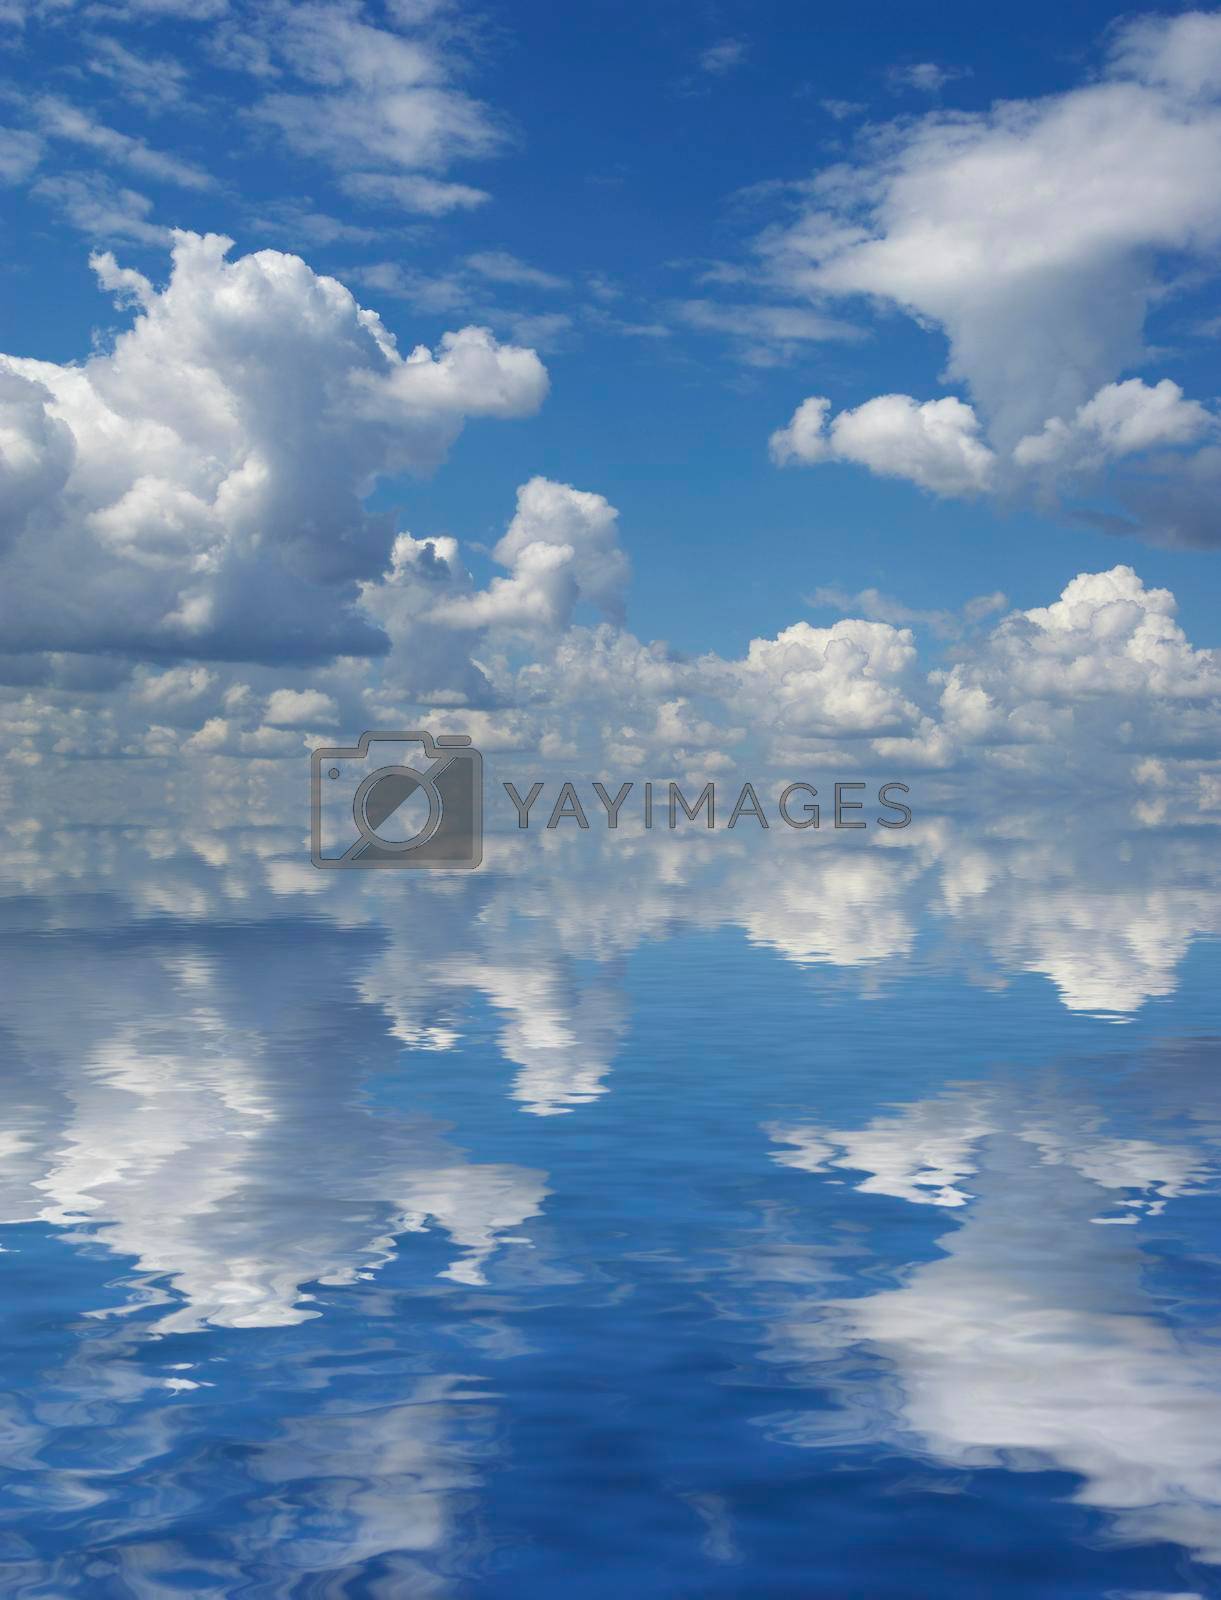 Royalty free image of Clear sky by tan4ikk1